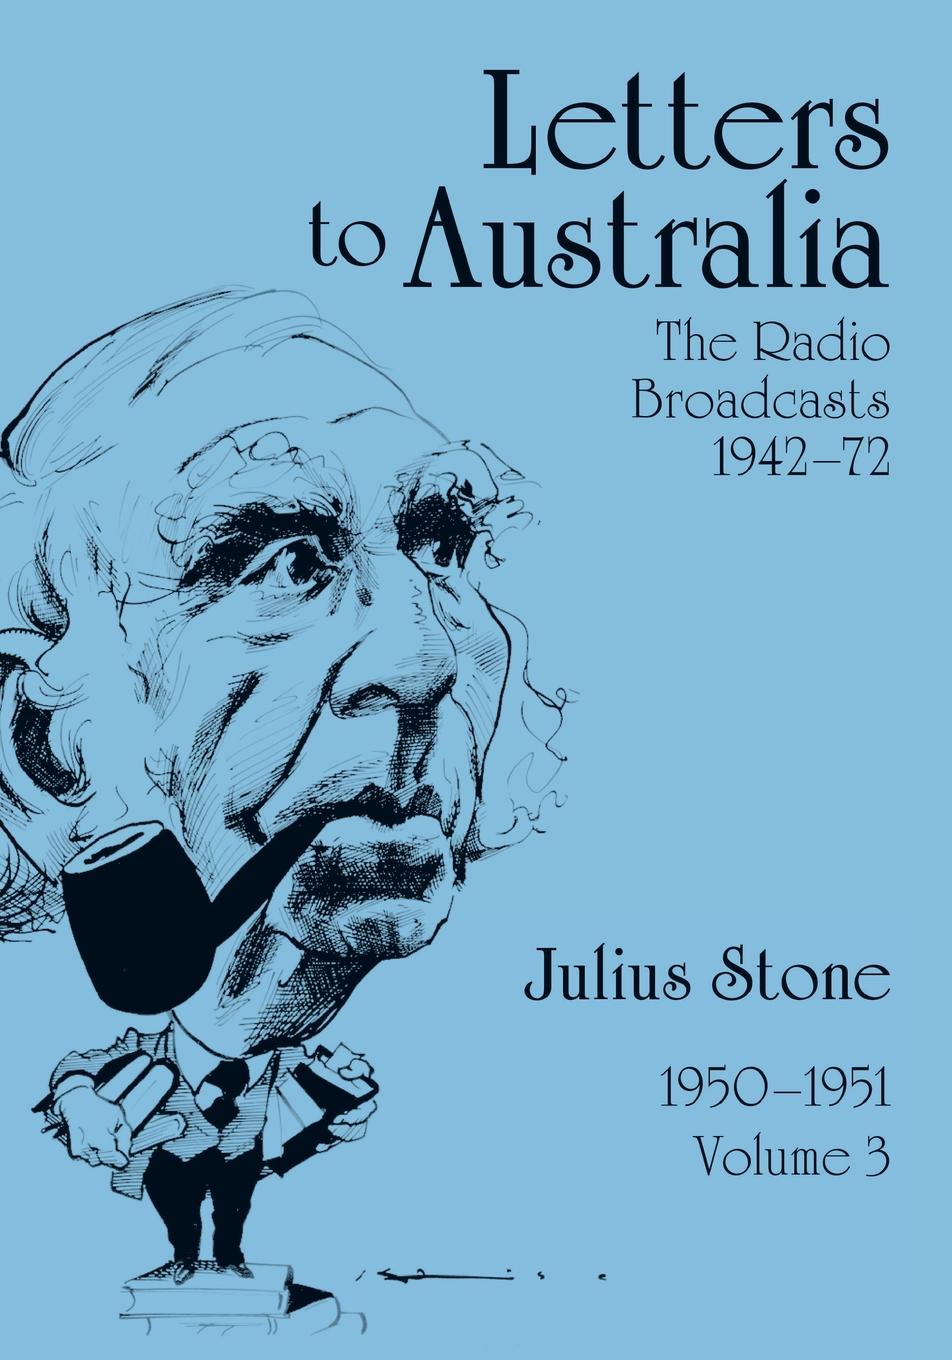 Letters to Australia. Essays from 1950-1951, Volume 3